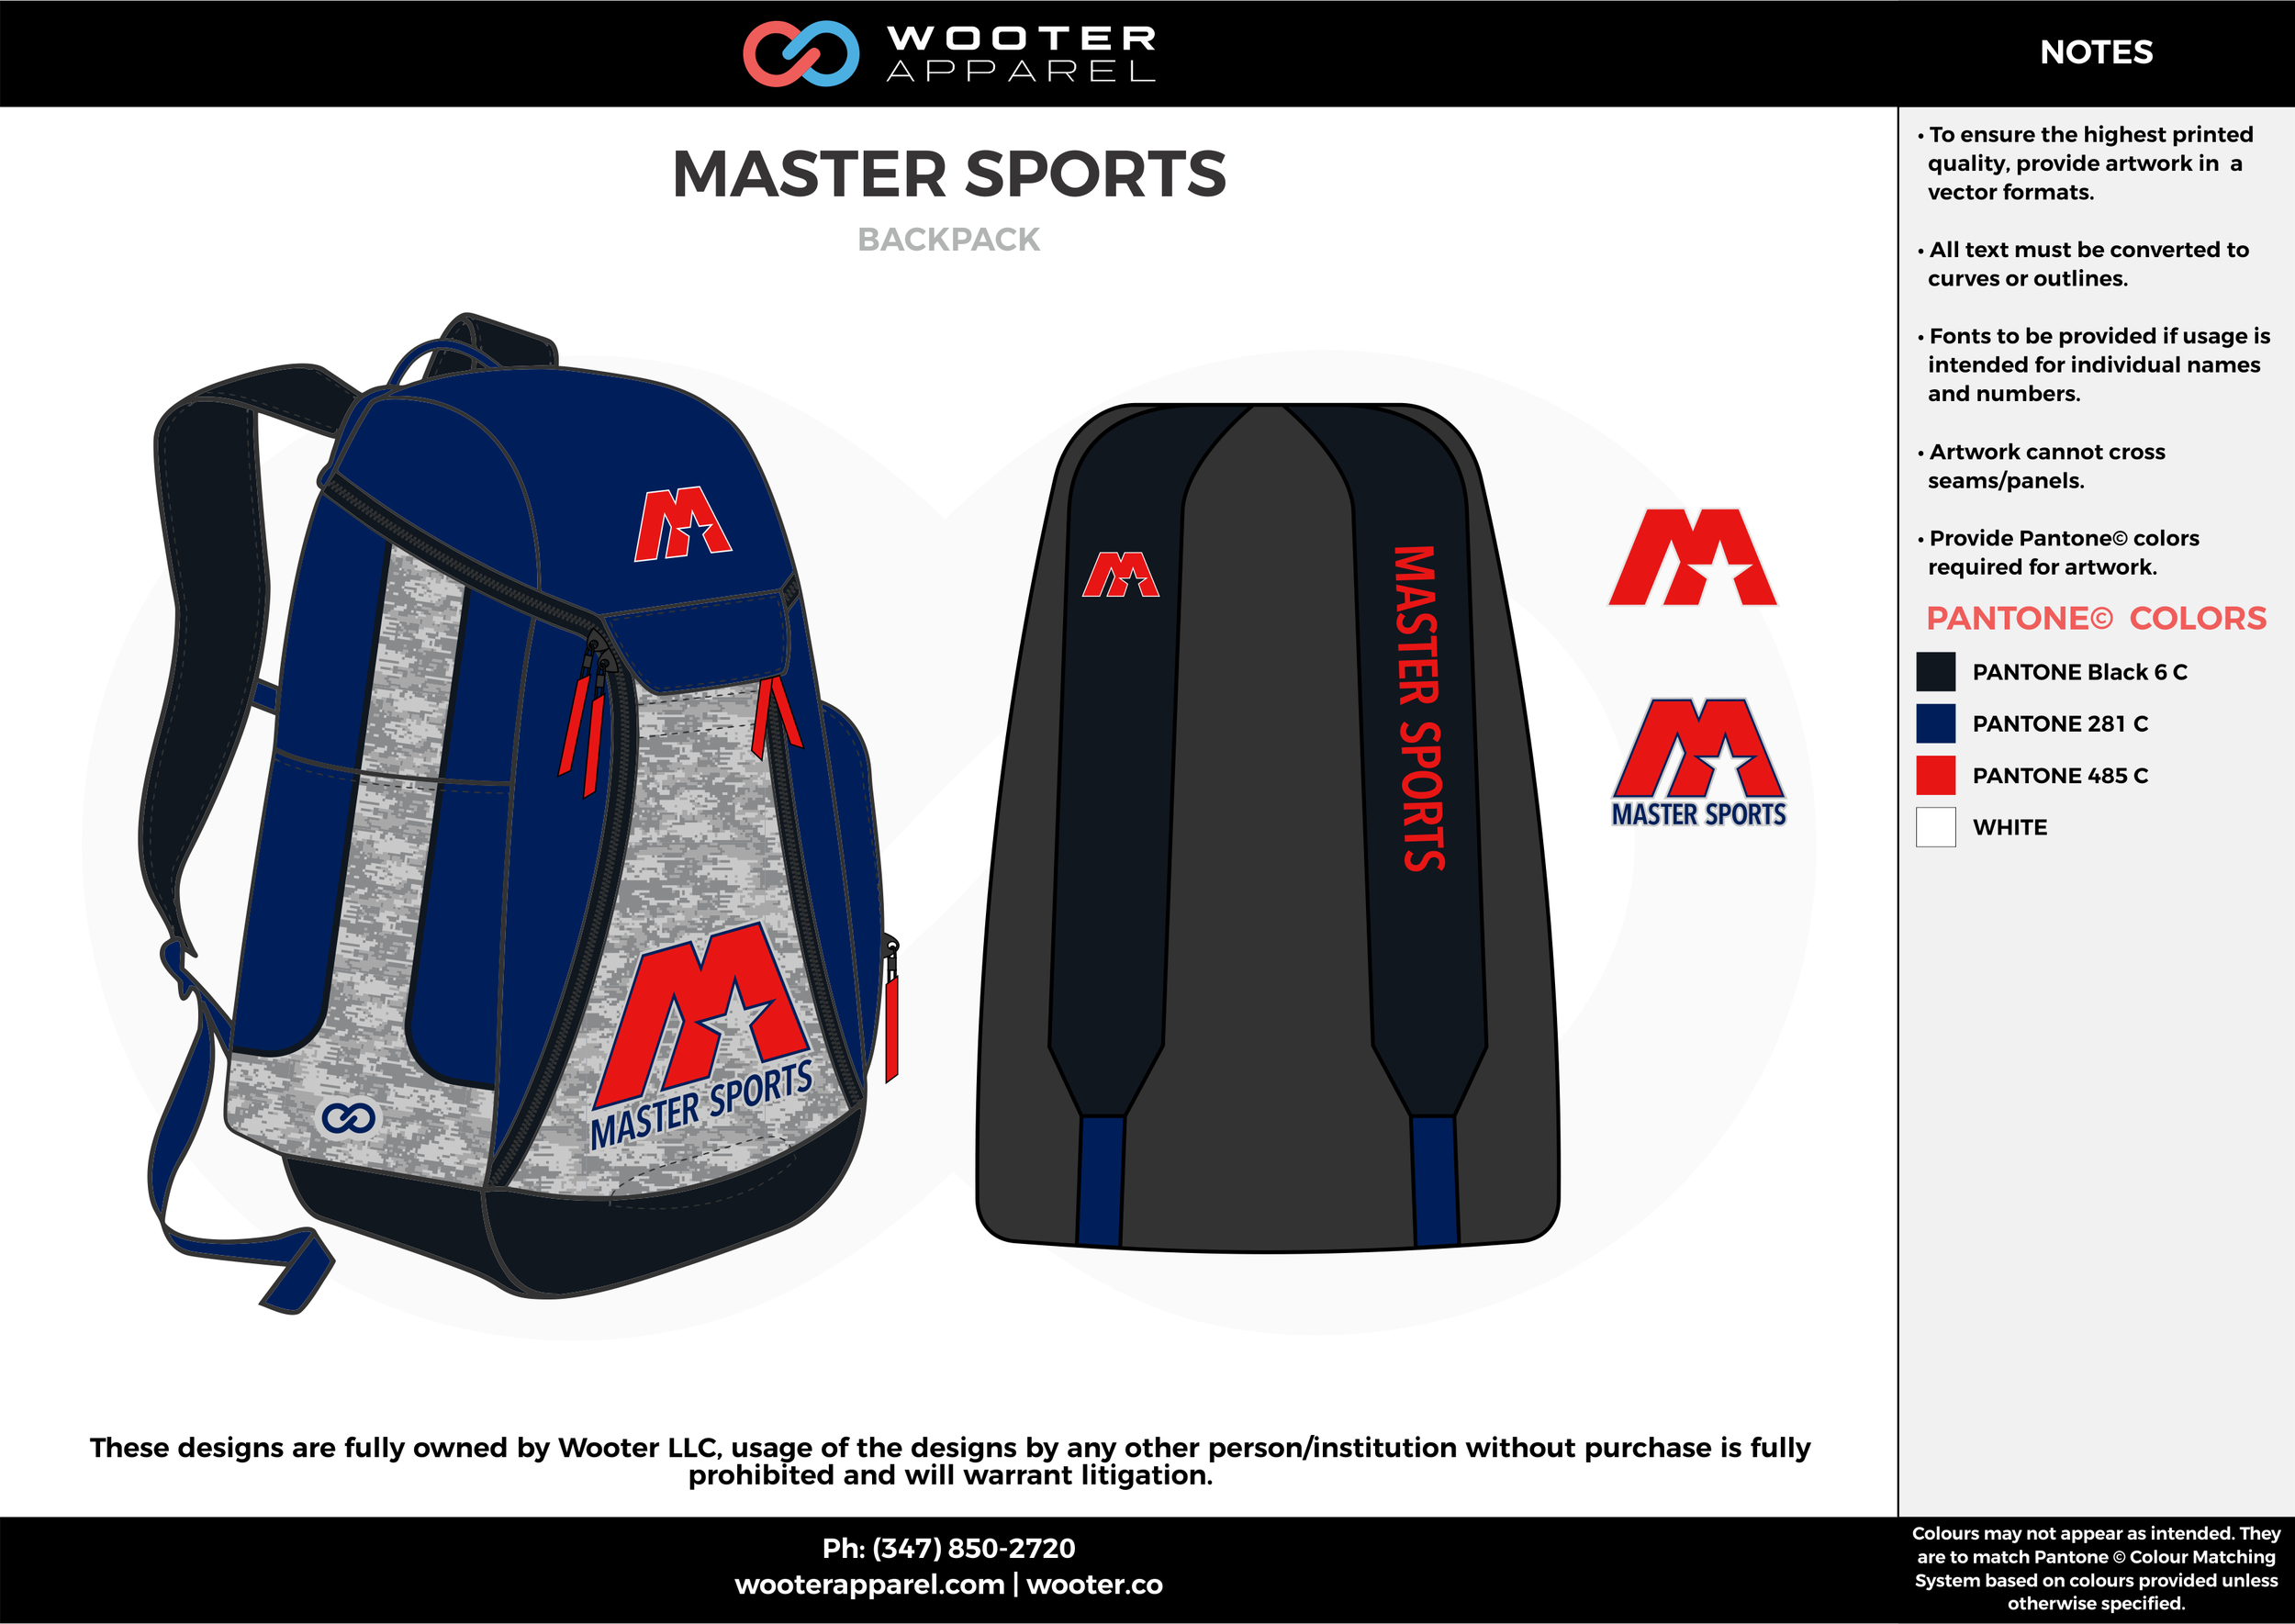 Custom Built Sublimated Backpacks | Customize Your Own Backpacks ...